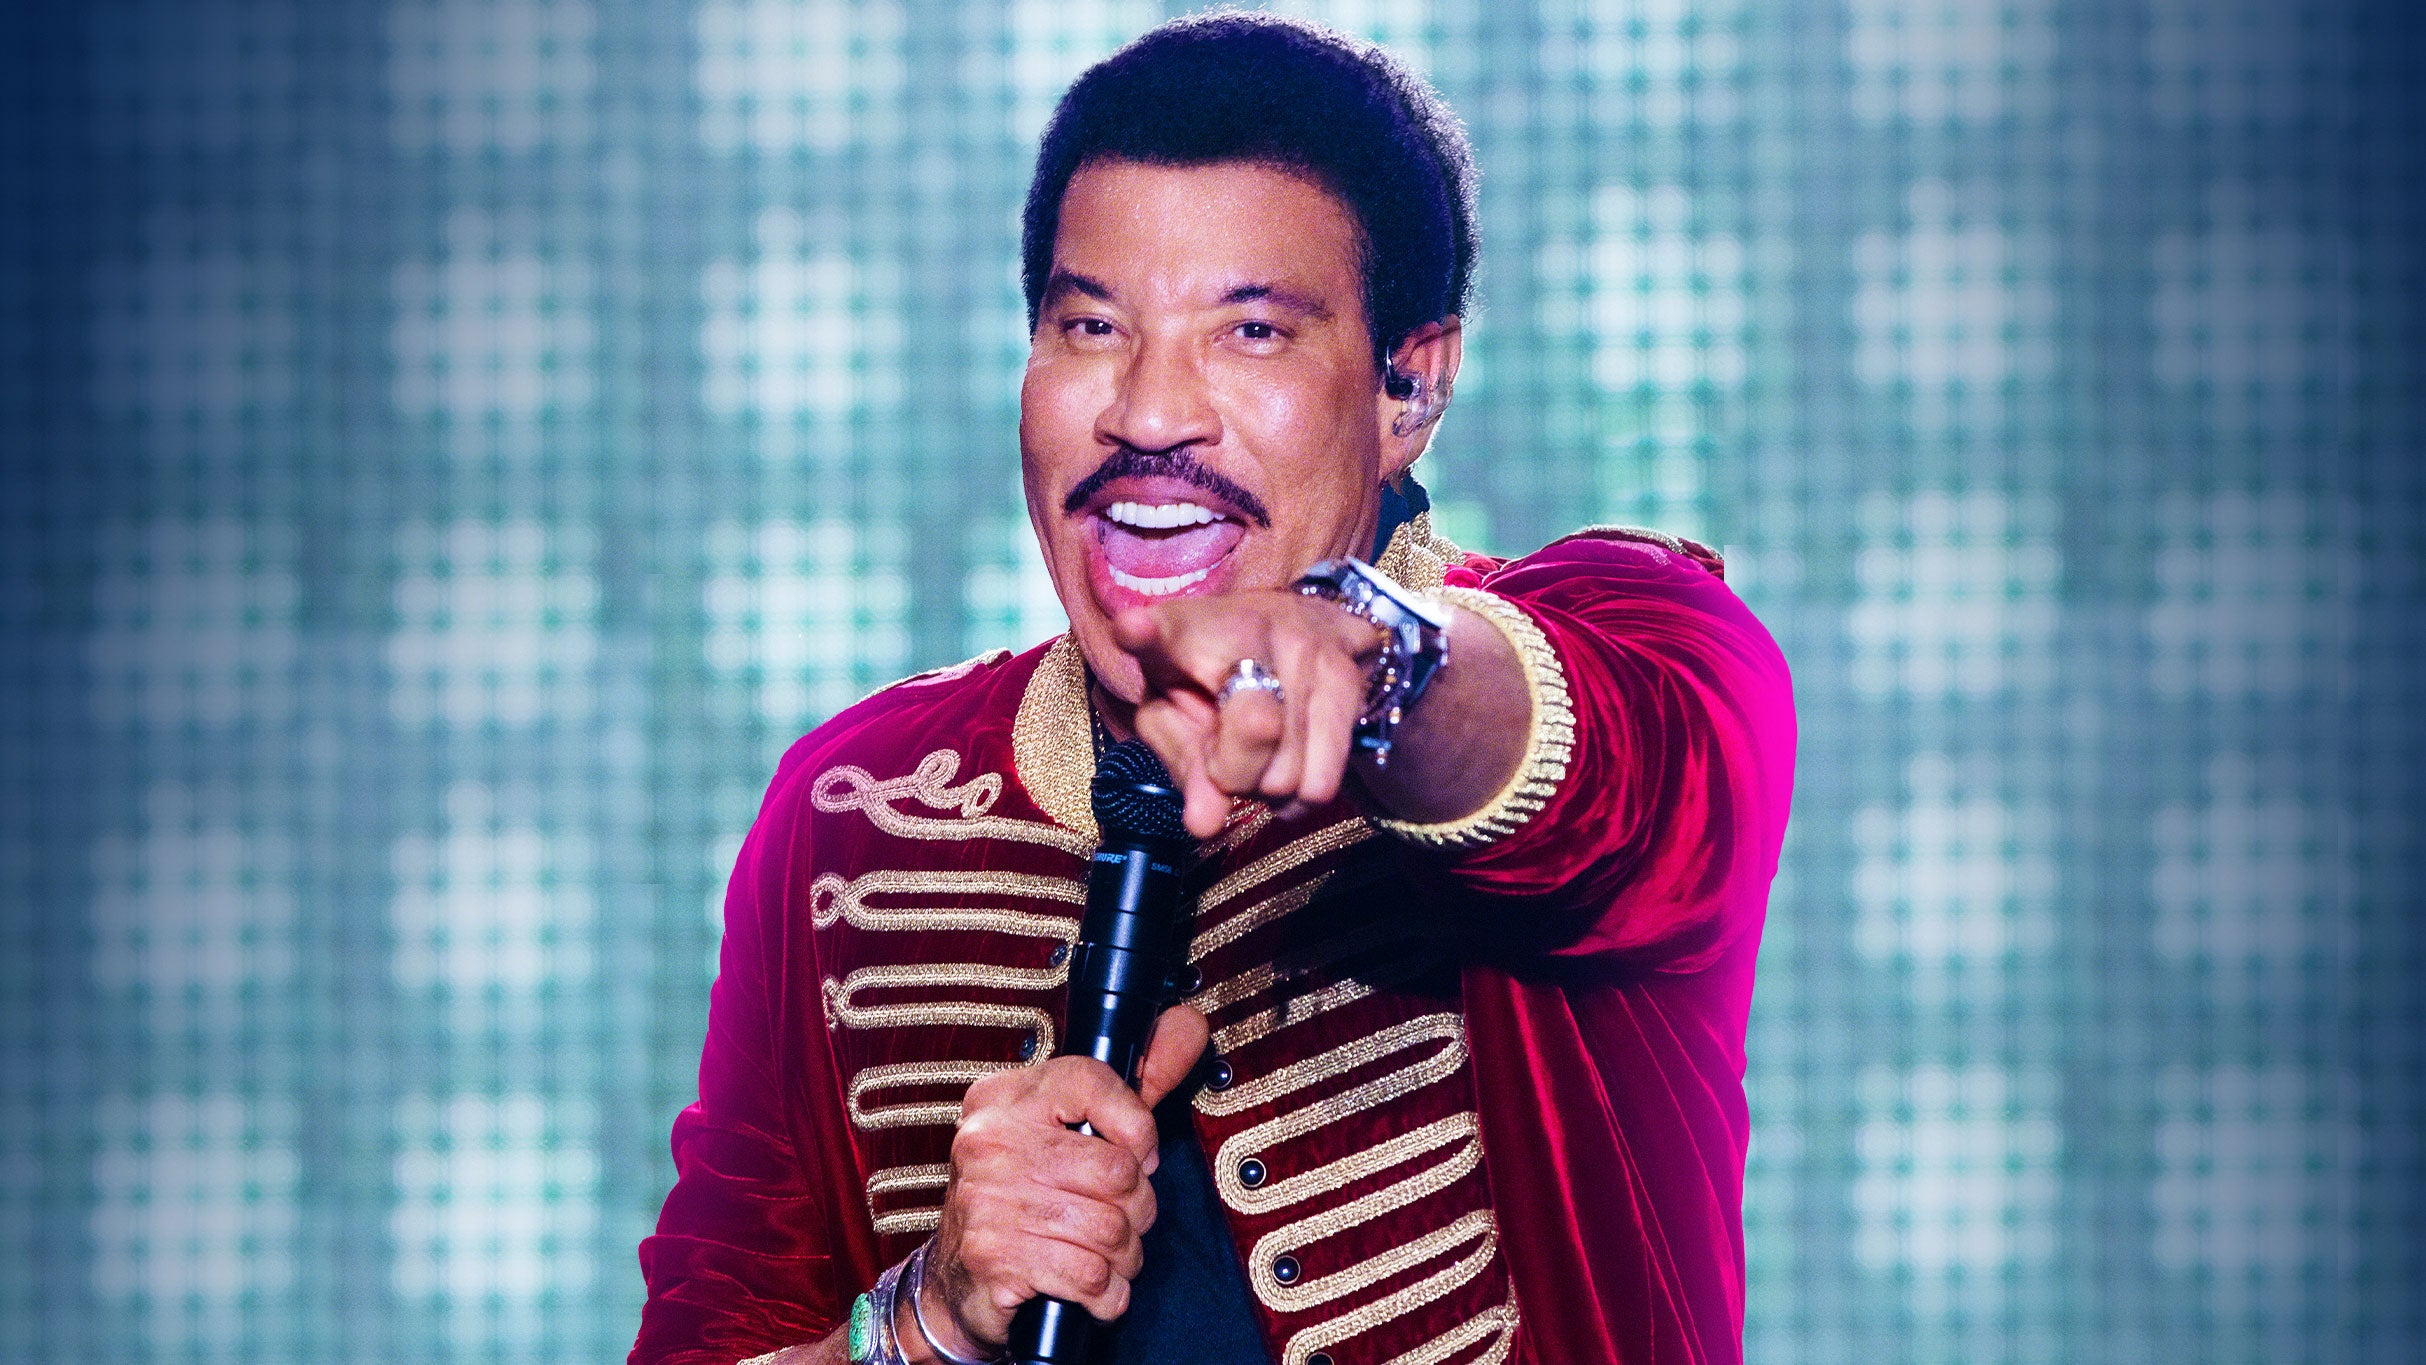 Lionel Richie And Earth, Wind & Fire - Sing A Song All Night Long free presale code for early tickets in Chicago